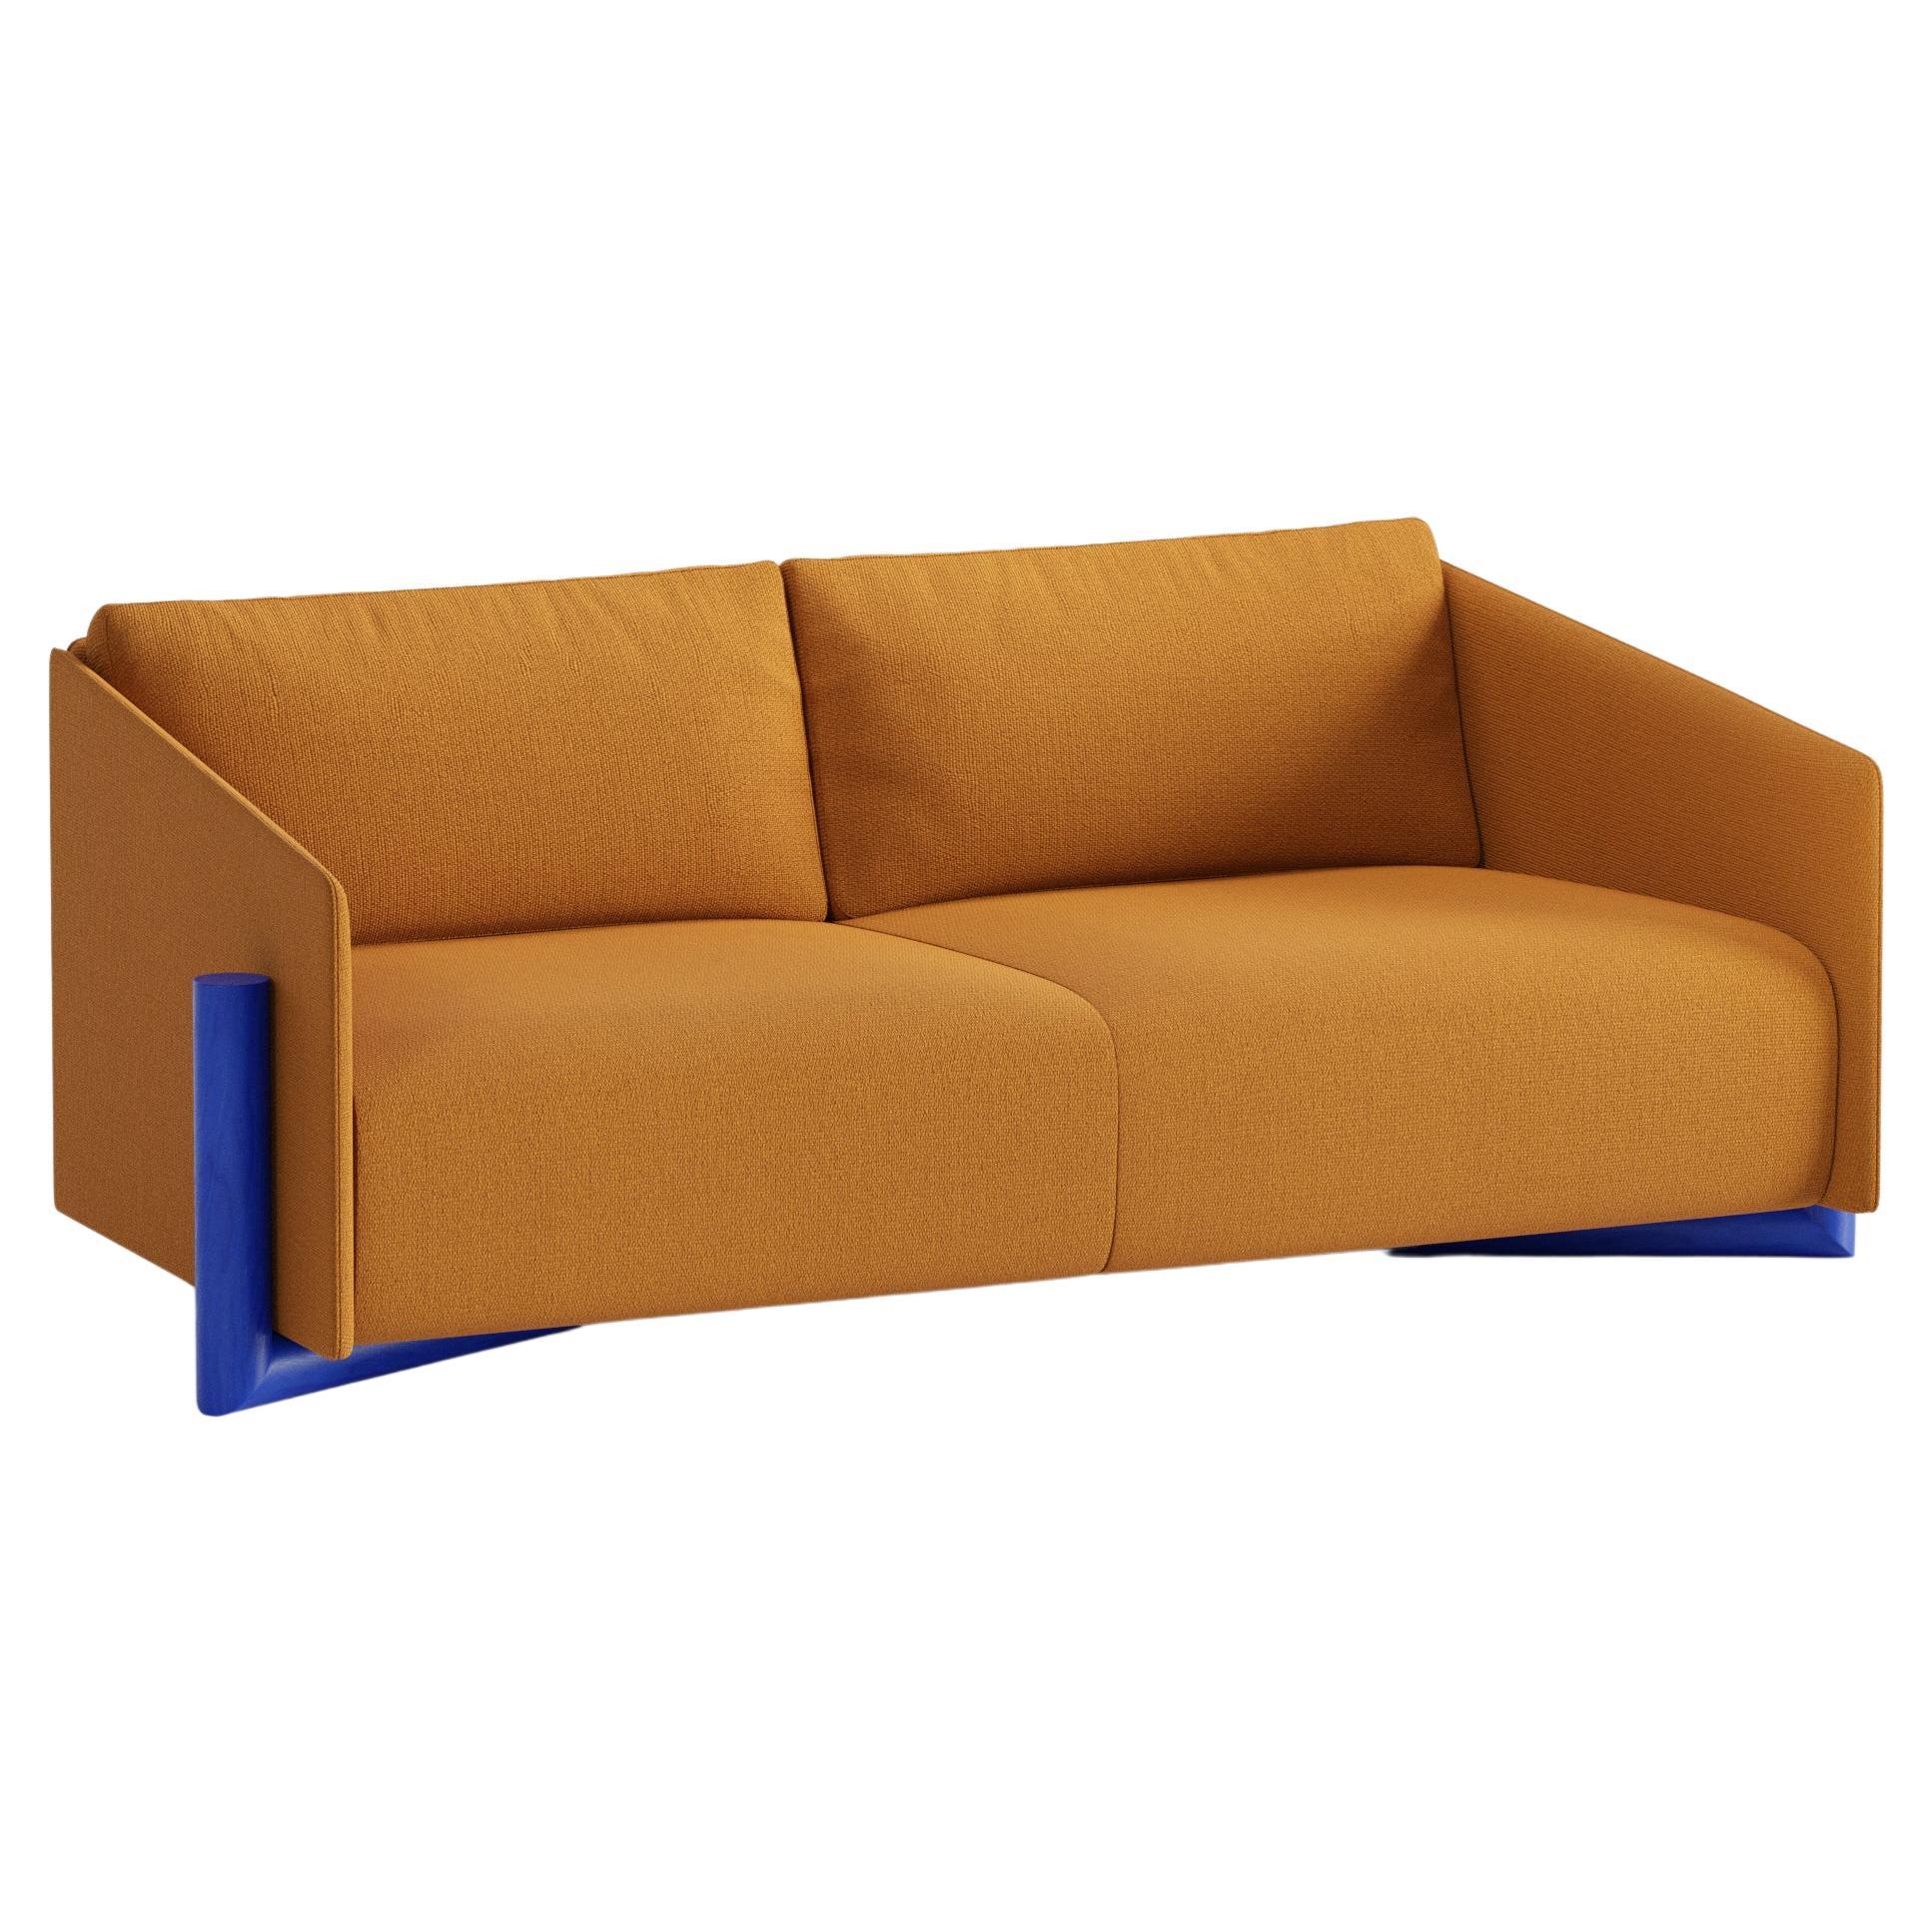 Mustard Timber 3 Seater Sofa by Kann Design For Sale